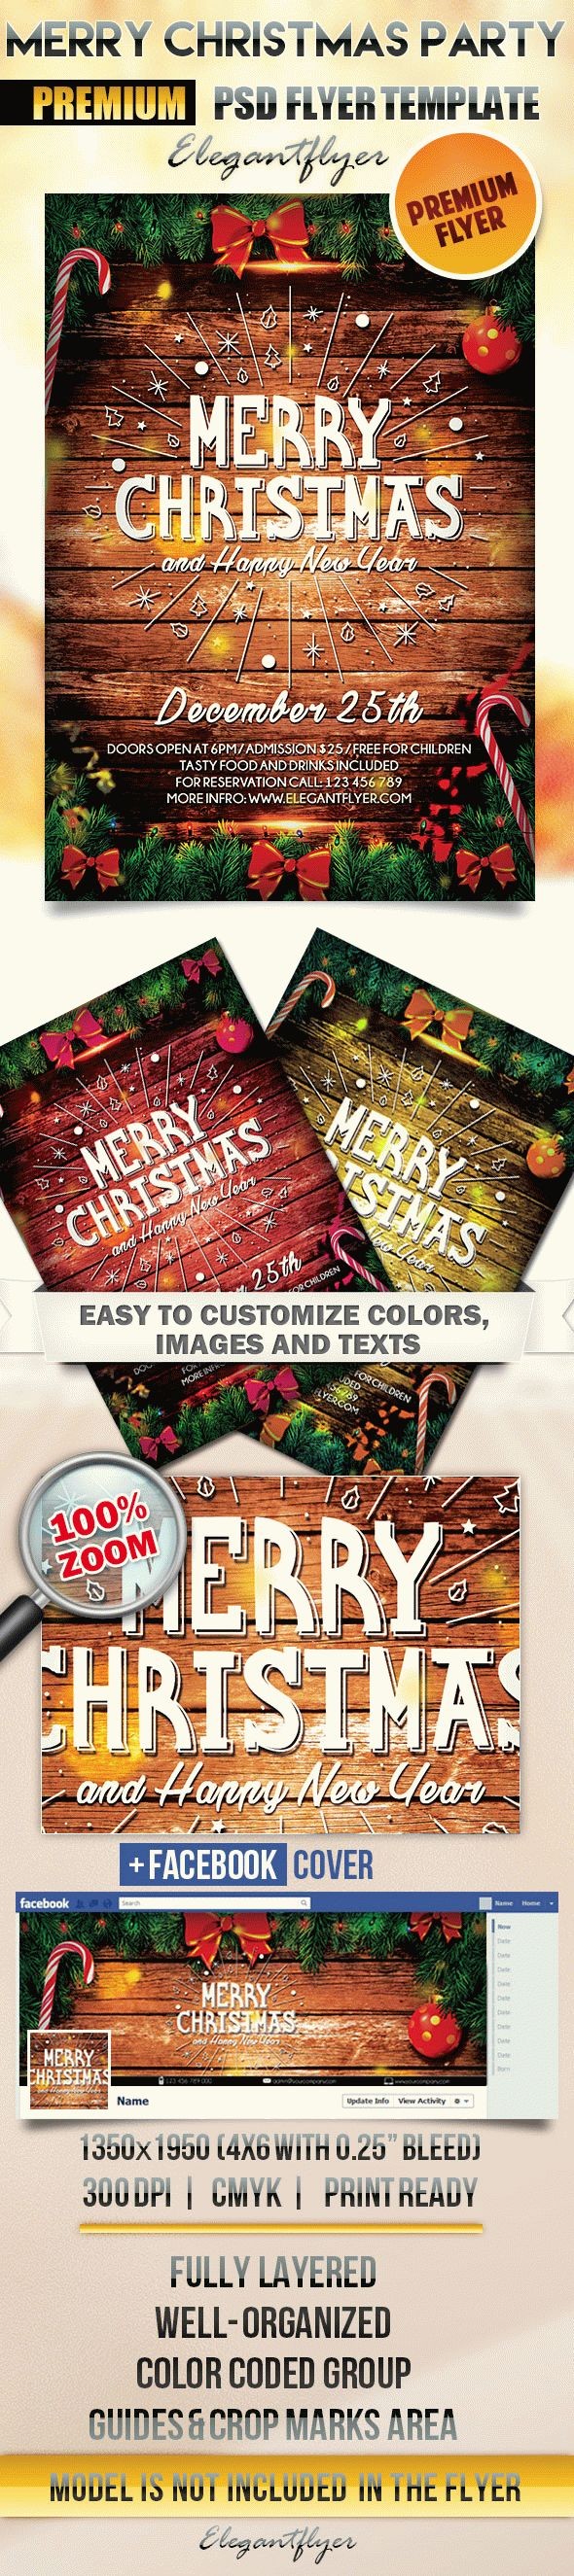 Merry Christmas and Happy New Year Party by ElegantFlyer